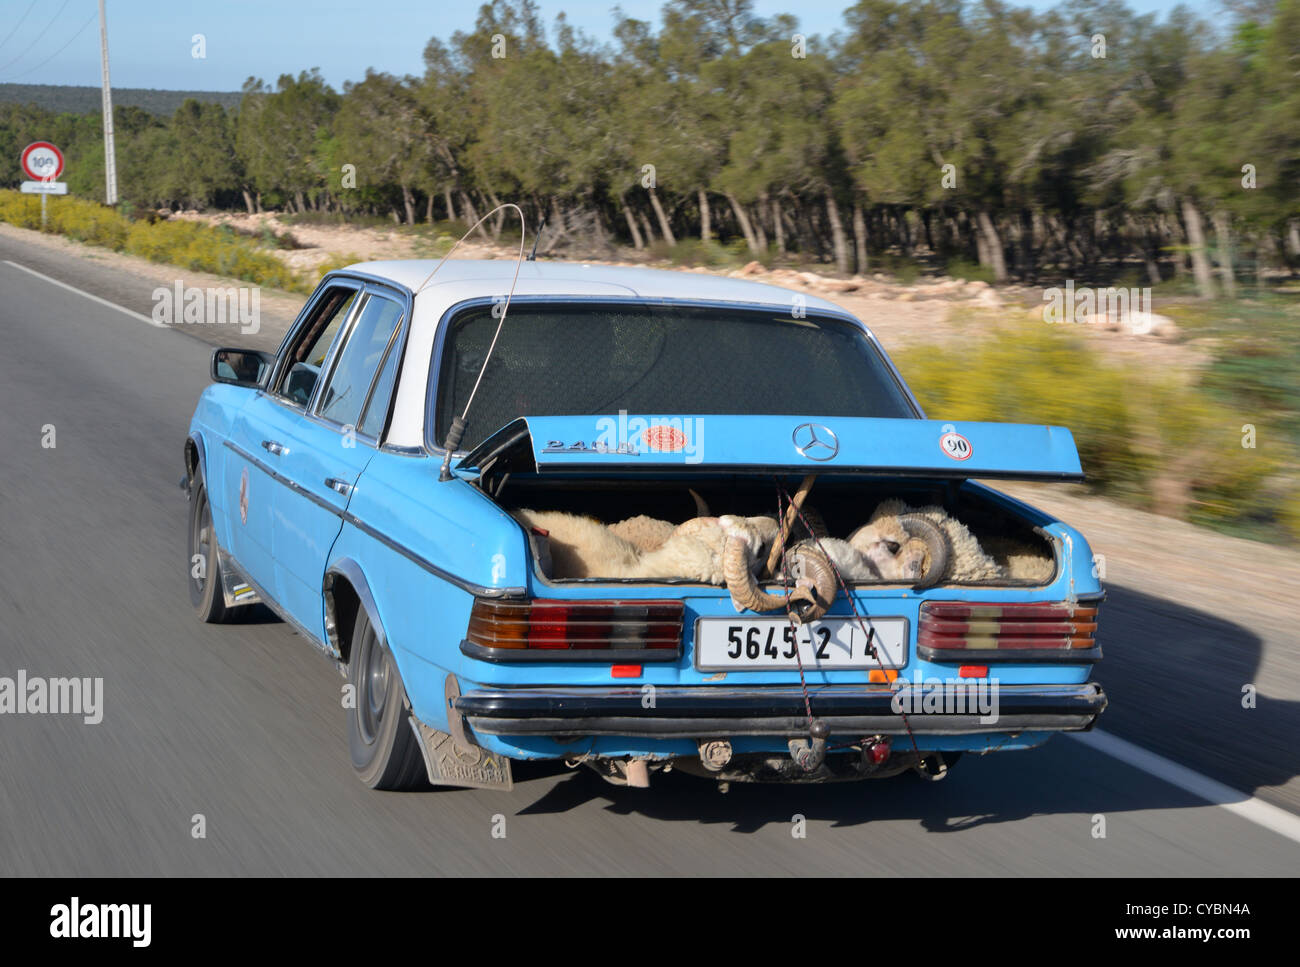 Morocco taxi cab - Mercedes W123 loaded with passengers and sheep in the boot (trunk) on a Moroccan highway Stock Photo